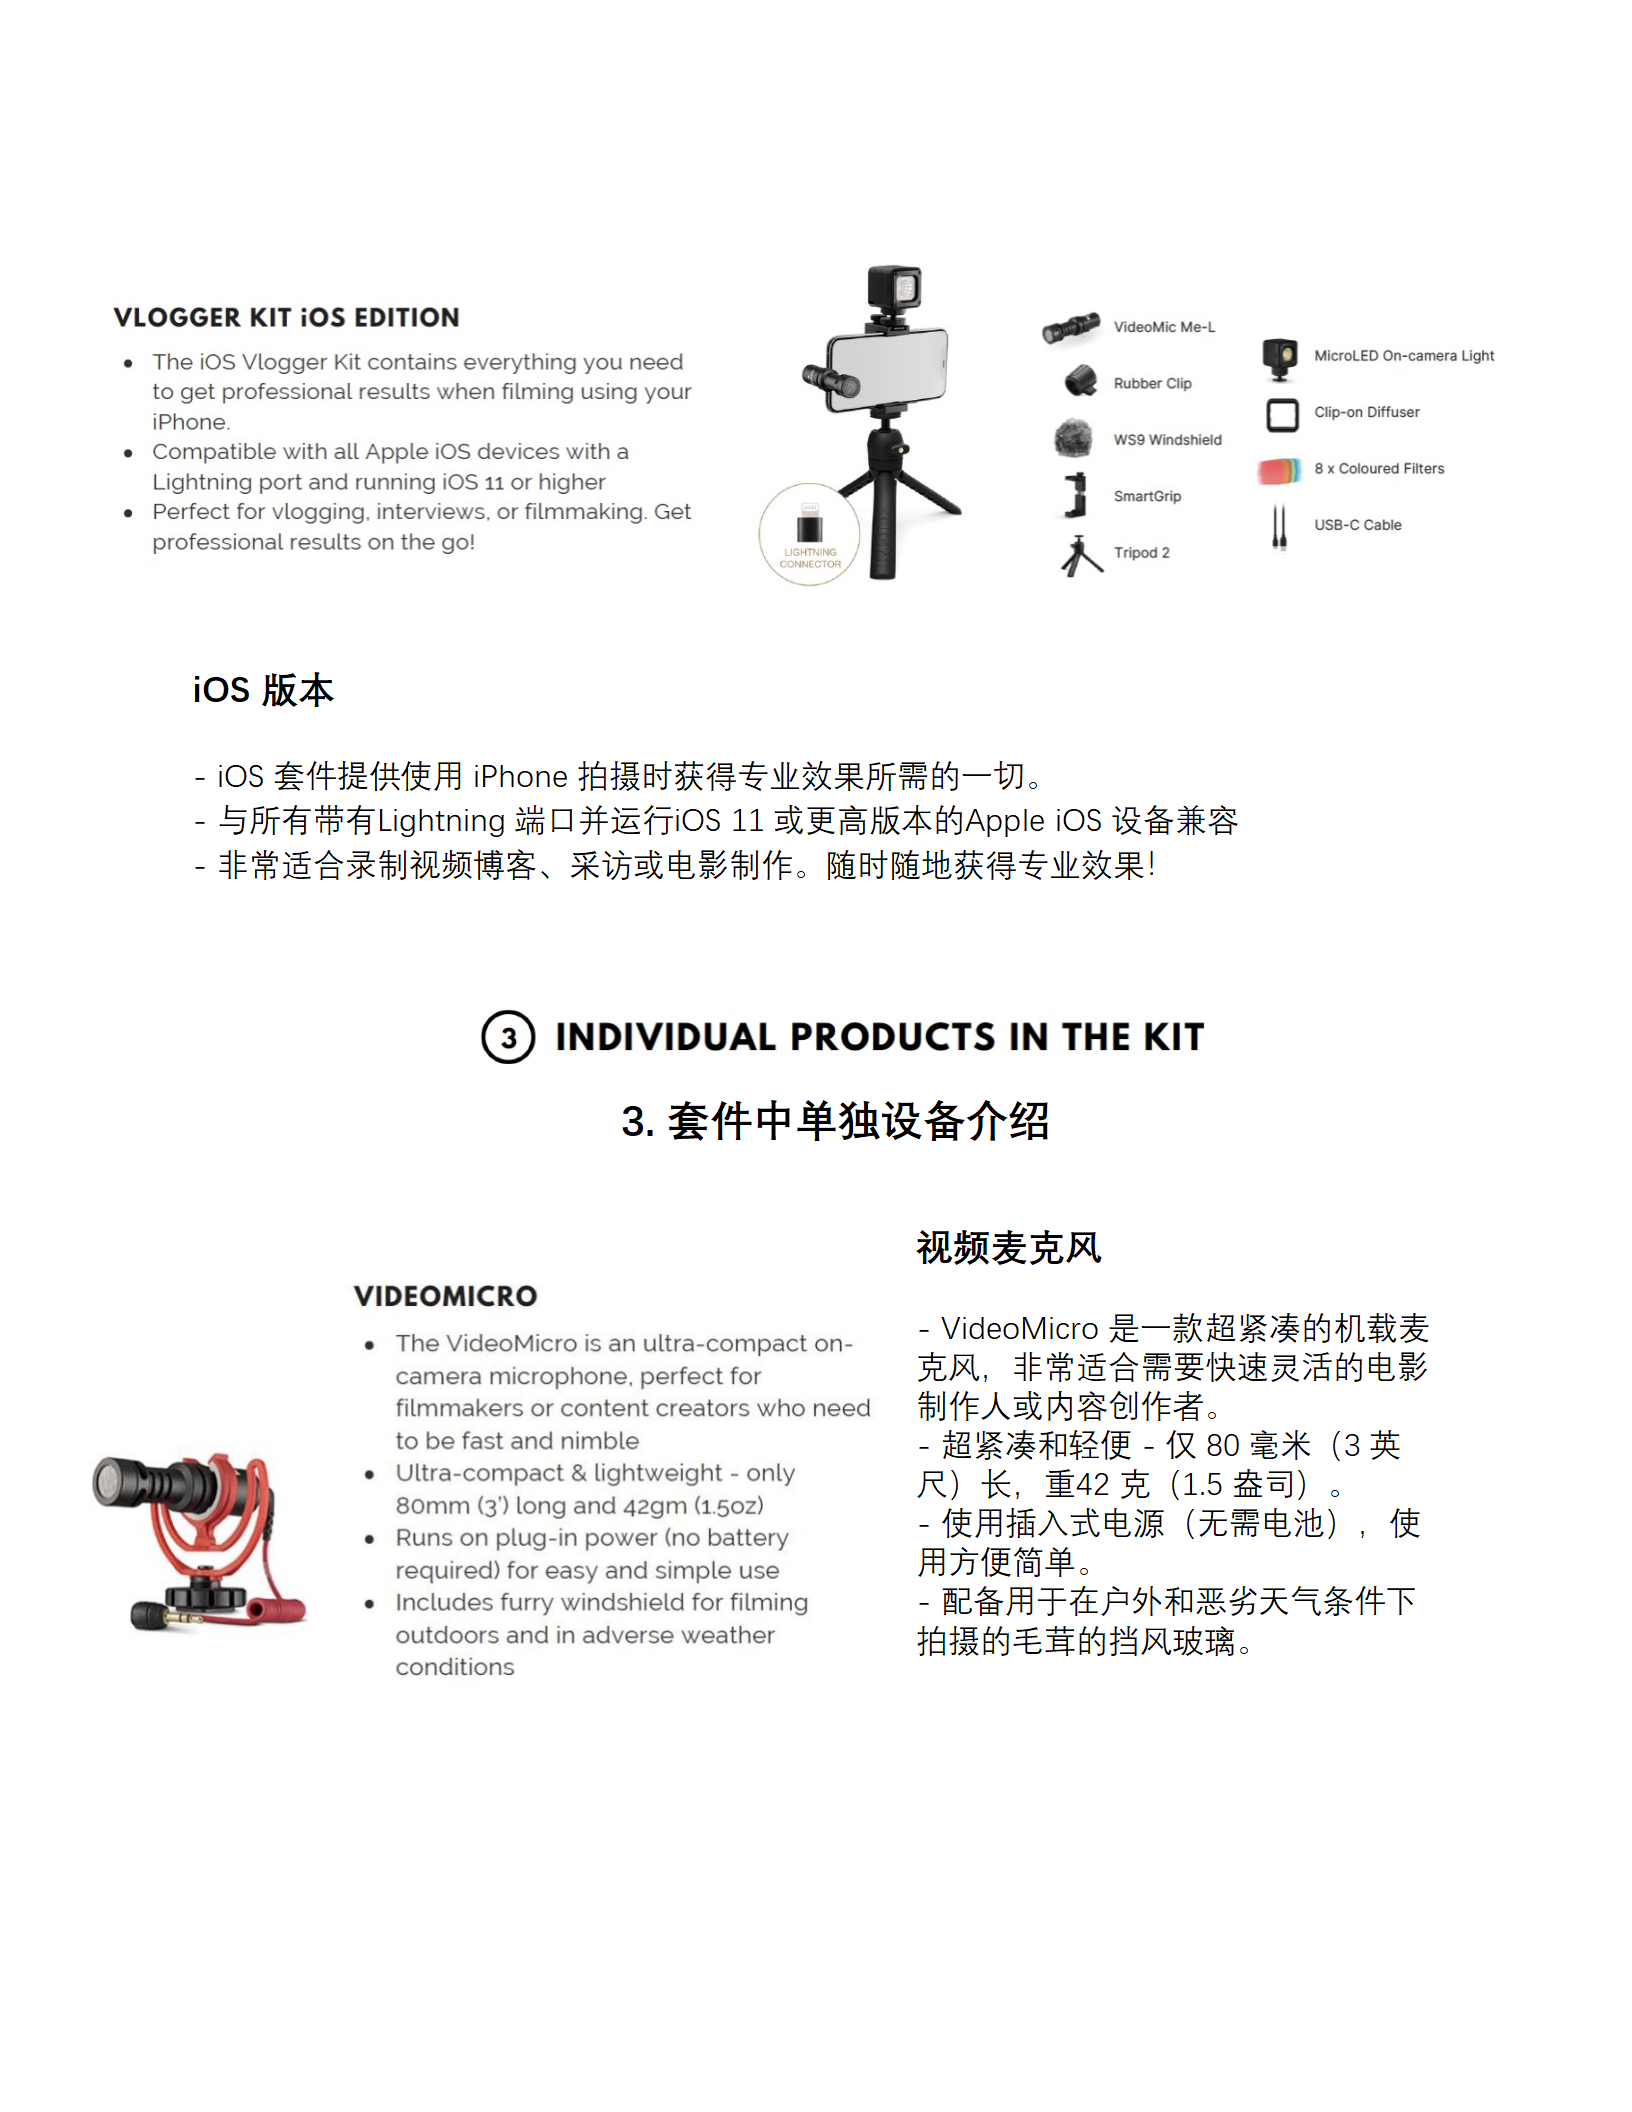 Vlogger Kit Feature Highlights and Explainer 中英_03.png